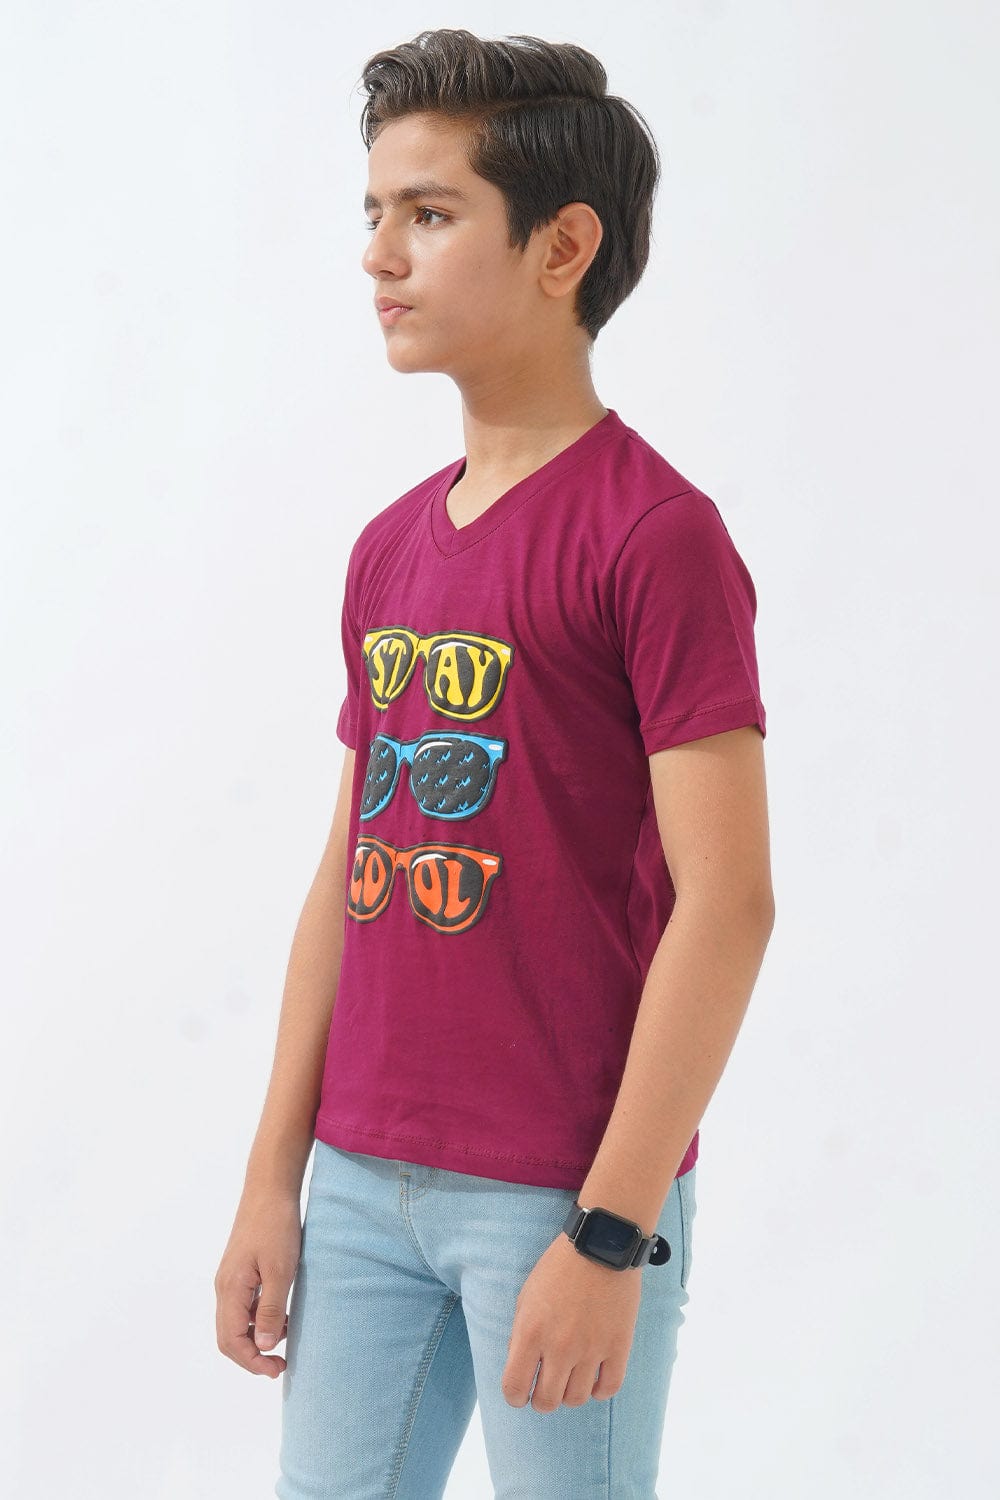 Hope Not Out by Shahid Afridi Boys Knit T-Shirt V-Neck Printed Tee